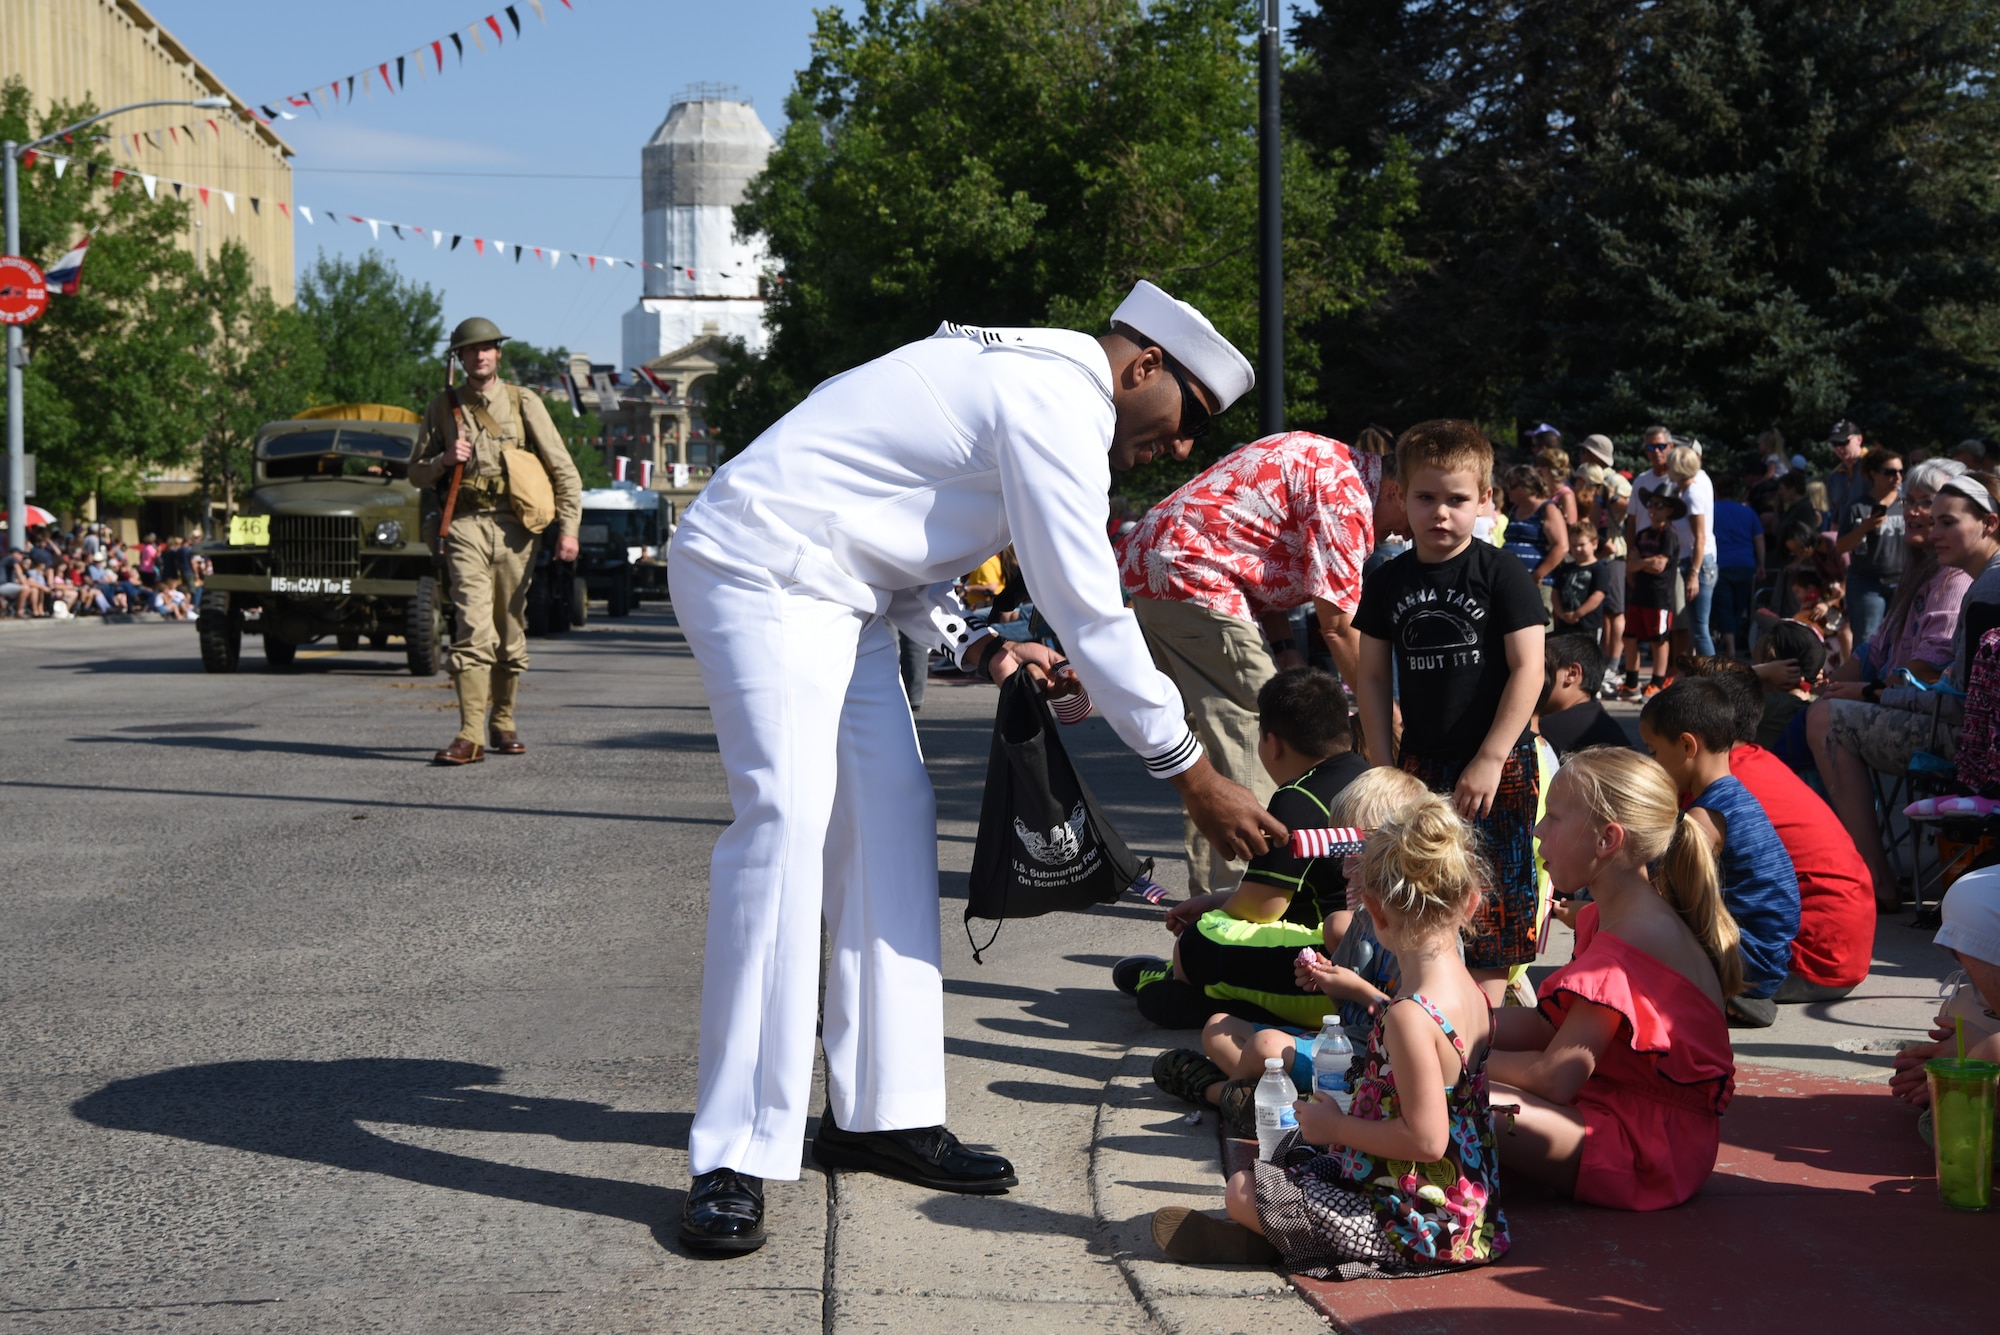 A U.S. Navy Sailor hands out American flags during the Cheyenne Frontier Days Grand Parade July 21, 2018, Cheyenne, Wyo. F.E. Warren Air Force Base’s involvement during CFD provides an opportunity to showcase the everlasting relationship between the base and the local community. (U.S. Air Force photo by Airman 1st Class Abbigayle Wagner)